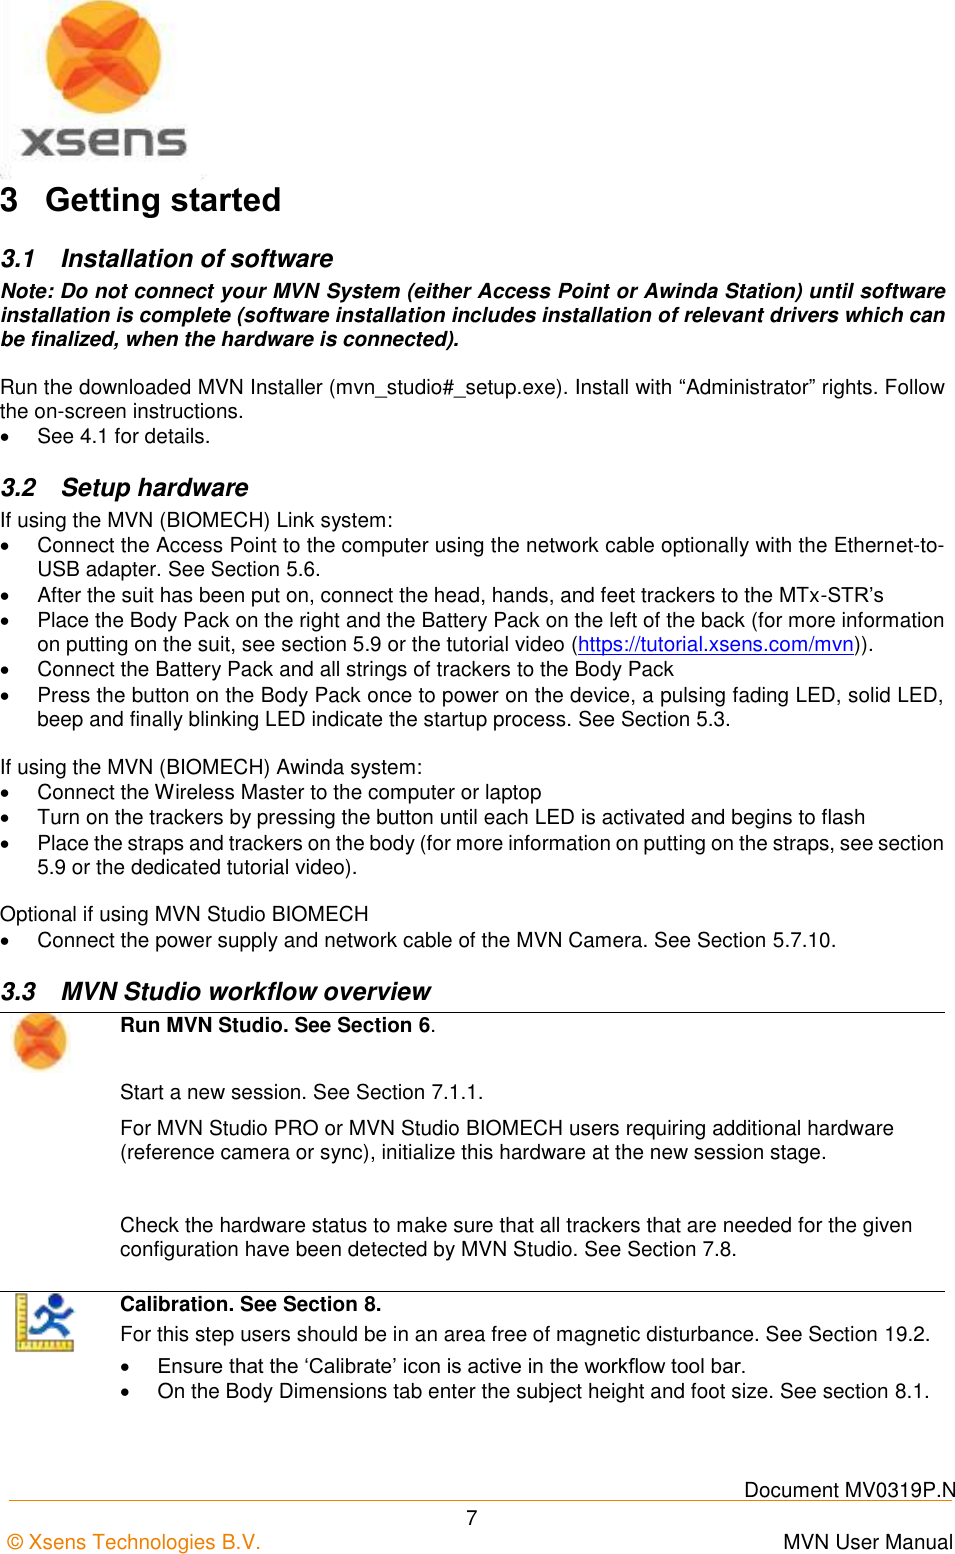    Document MV0319P.N © Xsens Technologies B.V.      MVN User Manual  7 3  Getting started 3.1  Installation of software Note: Do not connect your MVN System (either Access Point or Awinda Station) until software installation is complete (software installation includes installation of relevant drivers which can be finalized, when the hardware is connected).  Run the downloaded MVN Installer (mvn_studio#_setup.exe). Install with “Administrator” rights. Follow the on-screen instructions.   See 4.1 for details. 3.2  Setup hardware If using the MVN (BIOMECH) Link system:   Connect the Access Point to the computer using the network cable optionally with the Ethernet-to-USB adapter. See Section 5.6.   After the suit has been put on, connect the head, hands, and feet trackers to the MTx-STR’s    Place the Body Pack on the right and the Battery Pack on the left of the back (for more information on putting on the suit, see section 5.9 or the tutorial video (https://tutorial.xsens.com/mvn)).   Connect the Battery Pack and all strings of trackers to the Body Pack   Press the button on the Body Pack once to power on the device, a pulsing fading LED, solid LED, beep and finally blinking LED indicate the startup process. See Section 5.3.  If using the MVN (BIOMECH) Awinda system:   Connect the Wireless Master to the computer or laptop   Turn on the trackers by pressing the button until each LED is activated and begins to flash   Place the straps and trackers on the body (for more information on putting on the straps, see section 5.9 or the dedicated tutorial video).  Optional if using MVN Studio BIOMECH   Connect the power supply and network cable of the MVN Camera. See Section 5.7.10. 3.3  MVN Studio workflow overview  Run MVN Studio. See Section 6.  Start a new session. See Section 7.1.1. For MVN Studio PRO or MVN Studio BIOMECH users requiring additional hardware (reference camera or sync), initialize this hardware at the new session stage.  Check the hardware status to make sure that all trackers that are needed for the given configuration have been detected by MVN Studio. See Section 7.8.   Calibration. See Section 8. For this step users should be in an area free of magnetic disturbance. See Section 19.2.  Ensure that the ‘Calibrate’ icon is active in the workflow tool bar.   On the Body Dimensions tab enter the subject height and foot size. See section 8.1. 